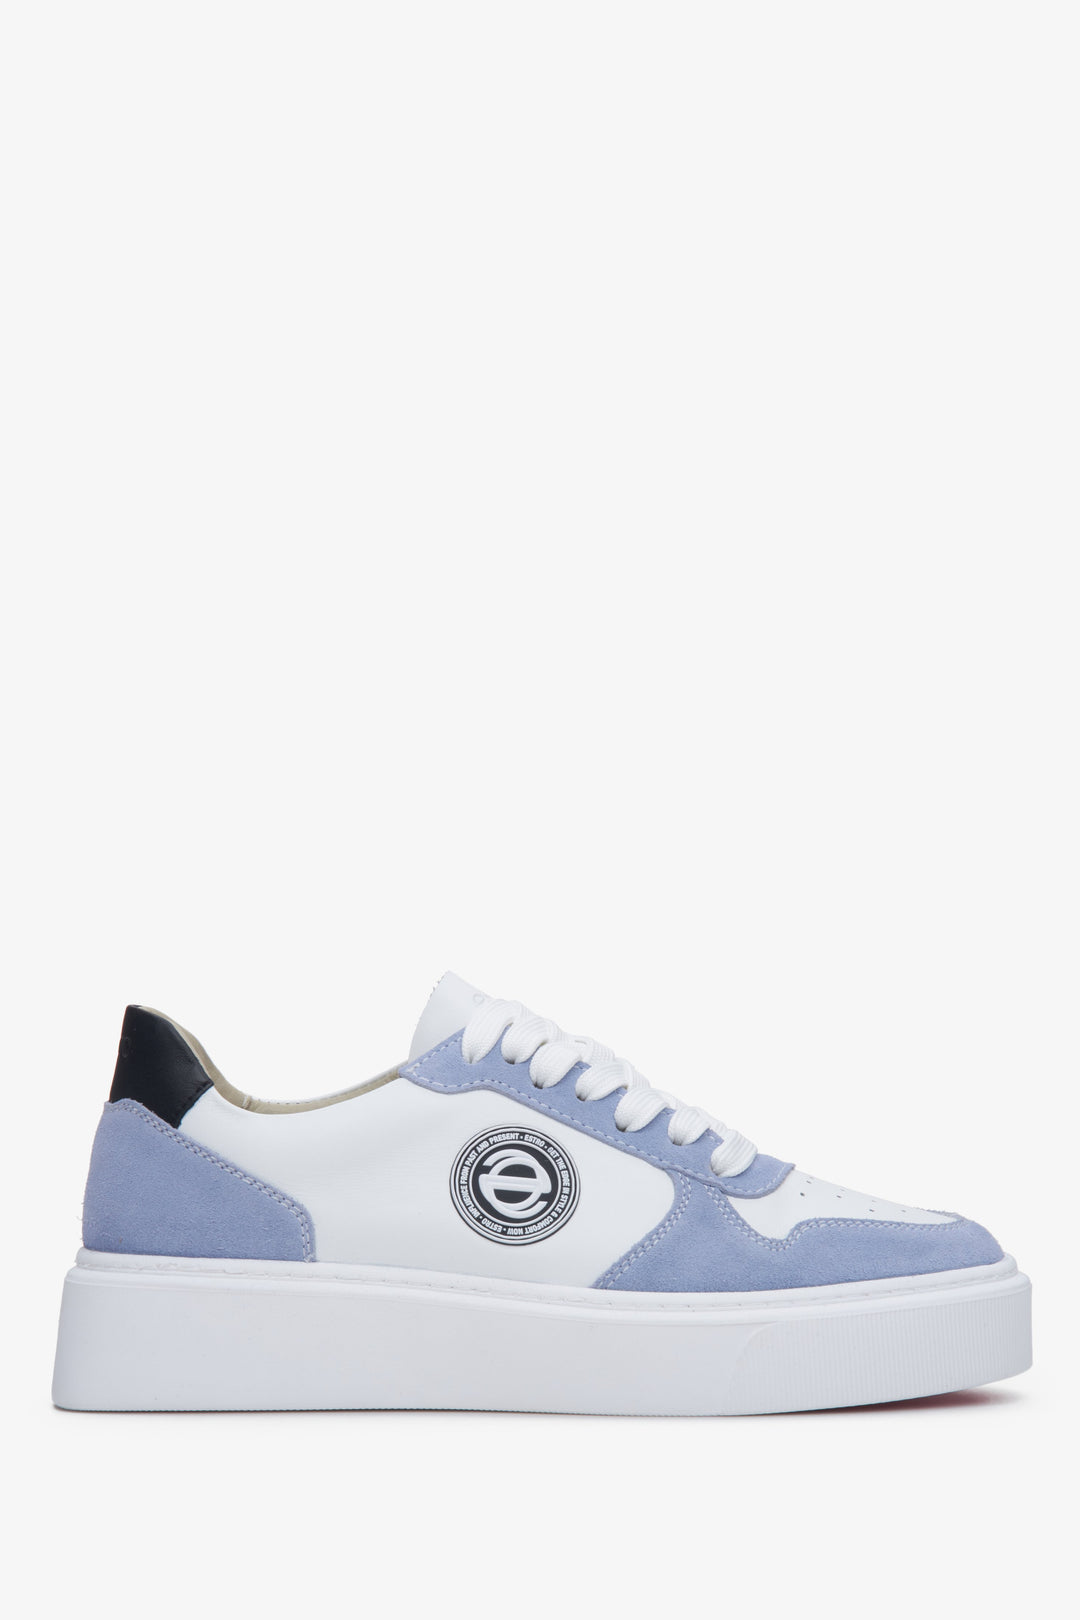 Blue and white women's sneakers made of leather and natural velvet  Estro ER00113465.